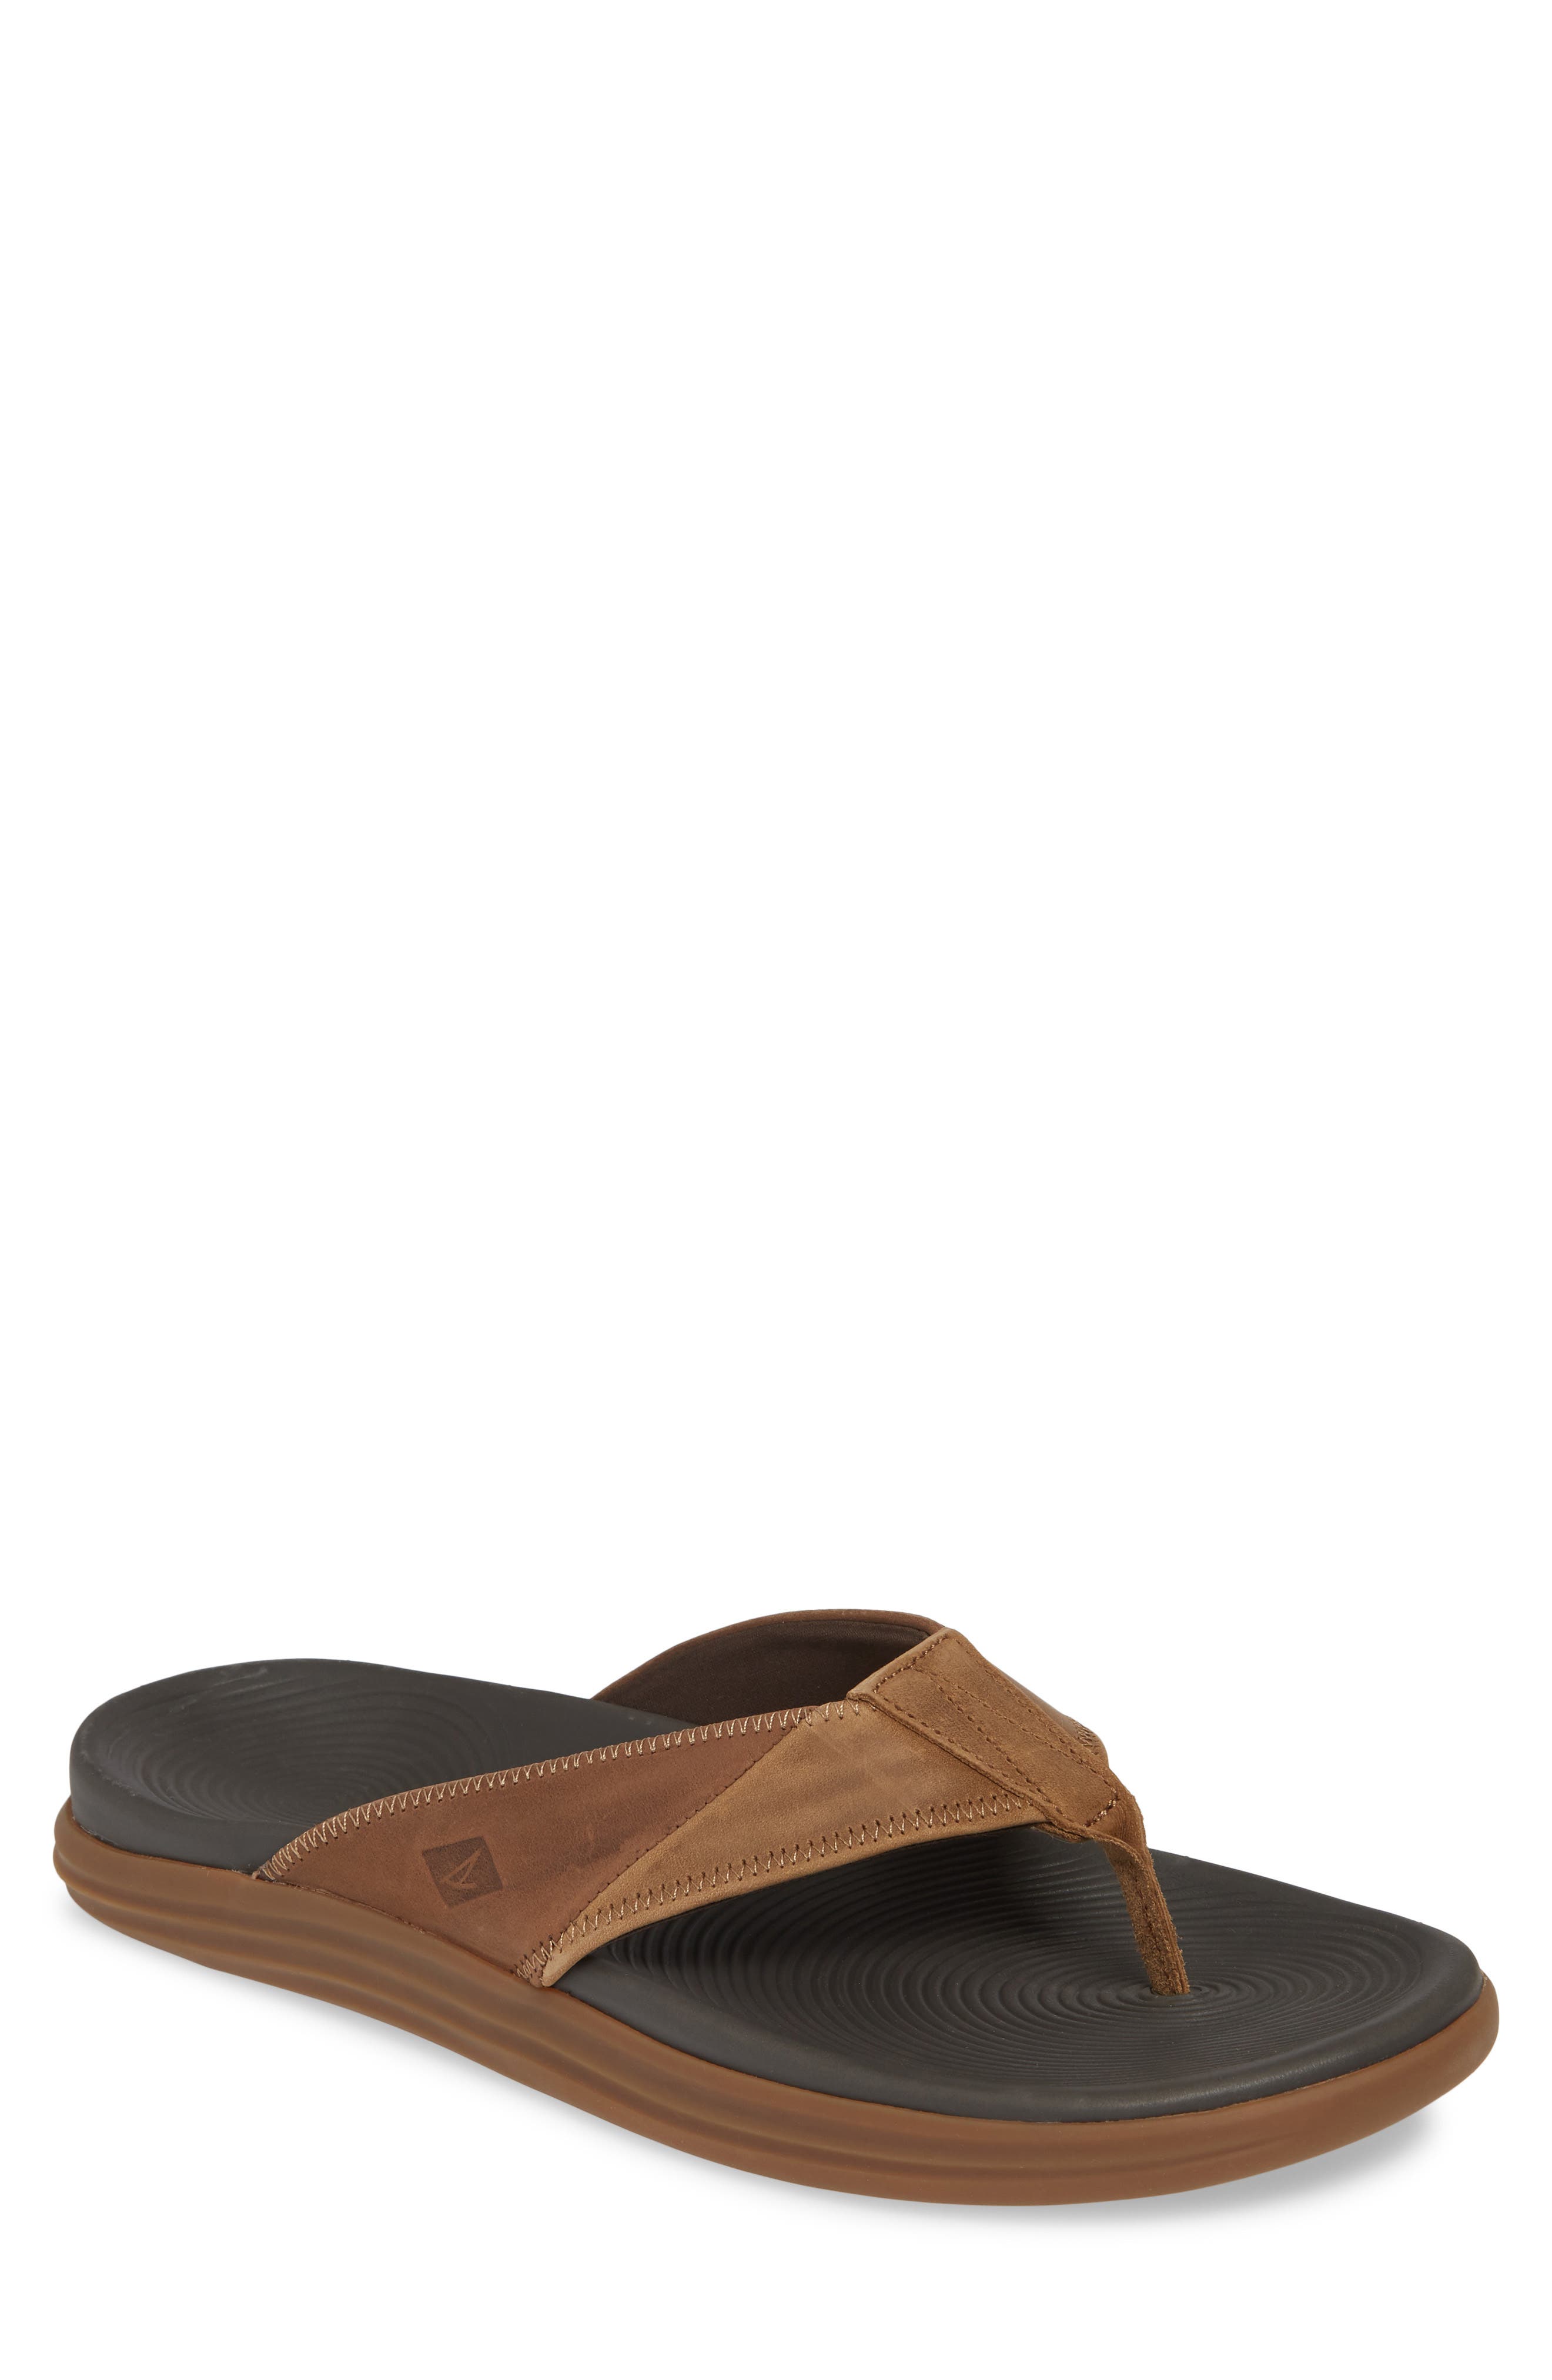 sperry sandals mens